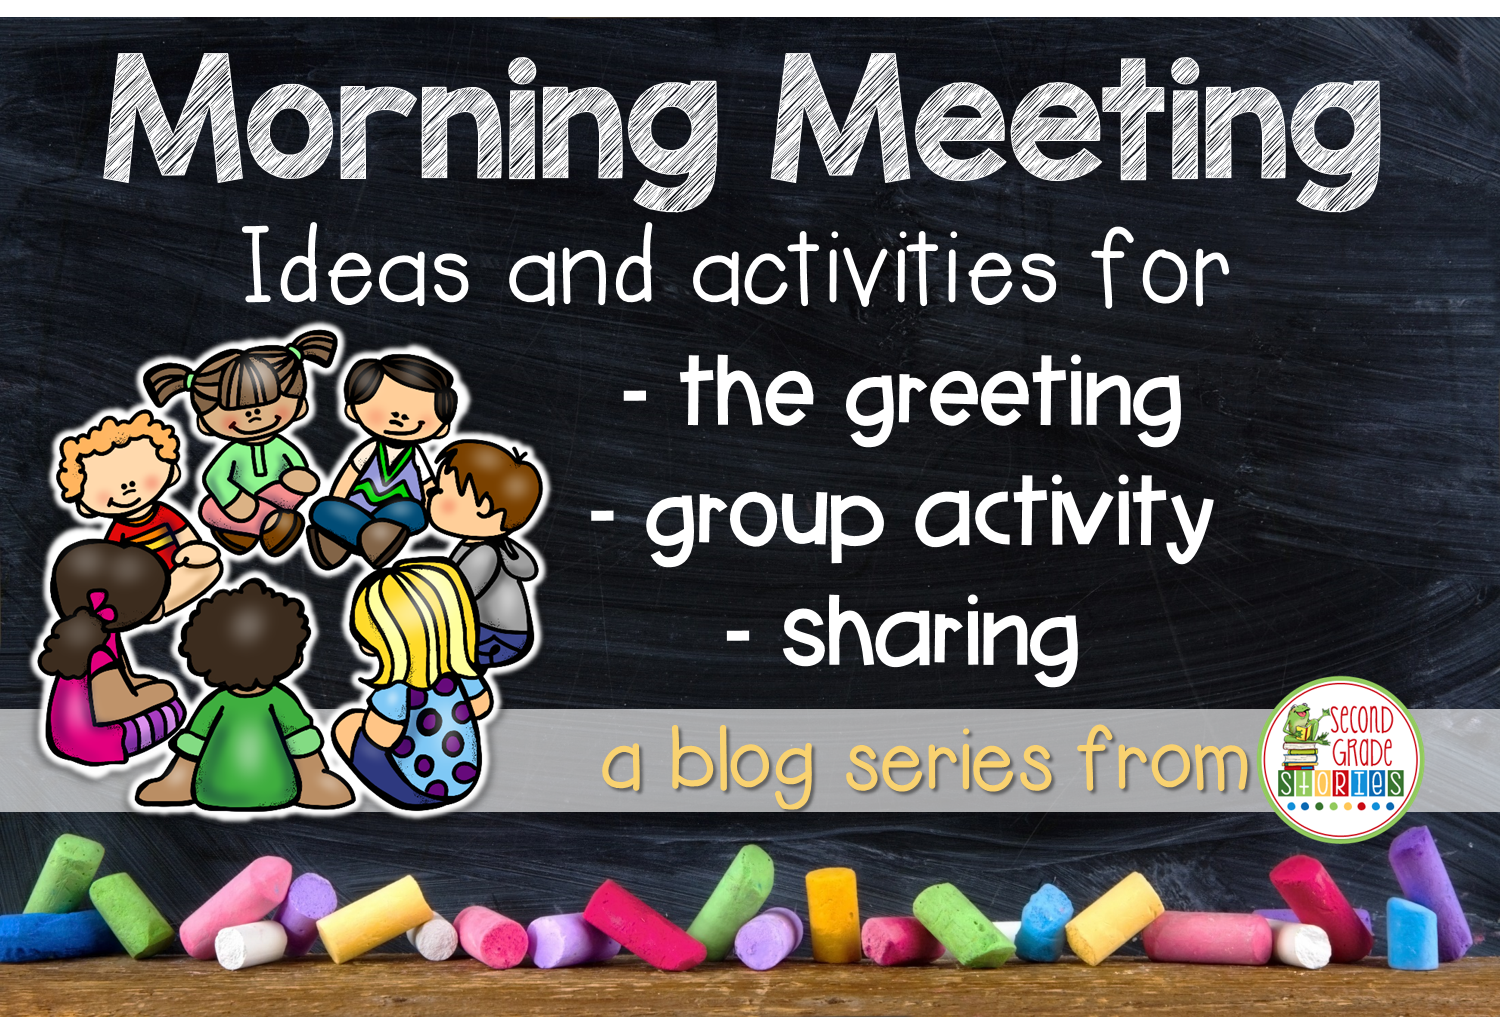 morning meeting - ideas and activities to keep things fresh - second